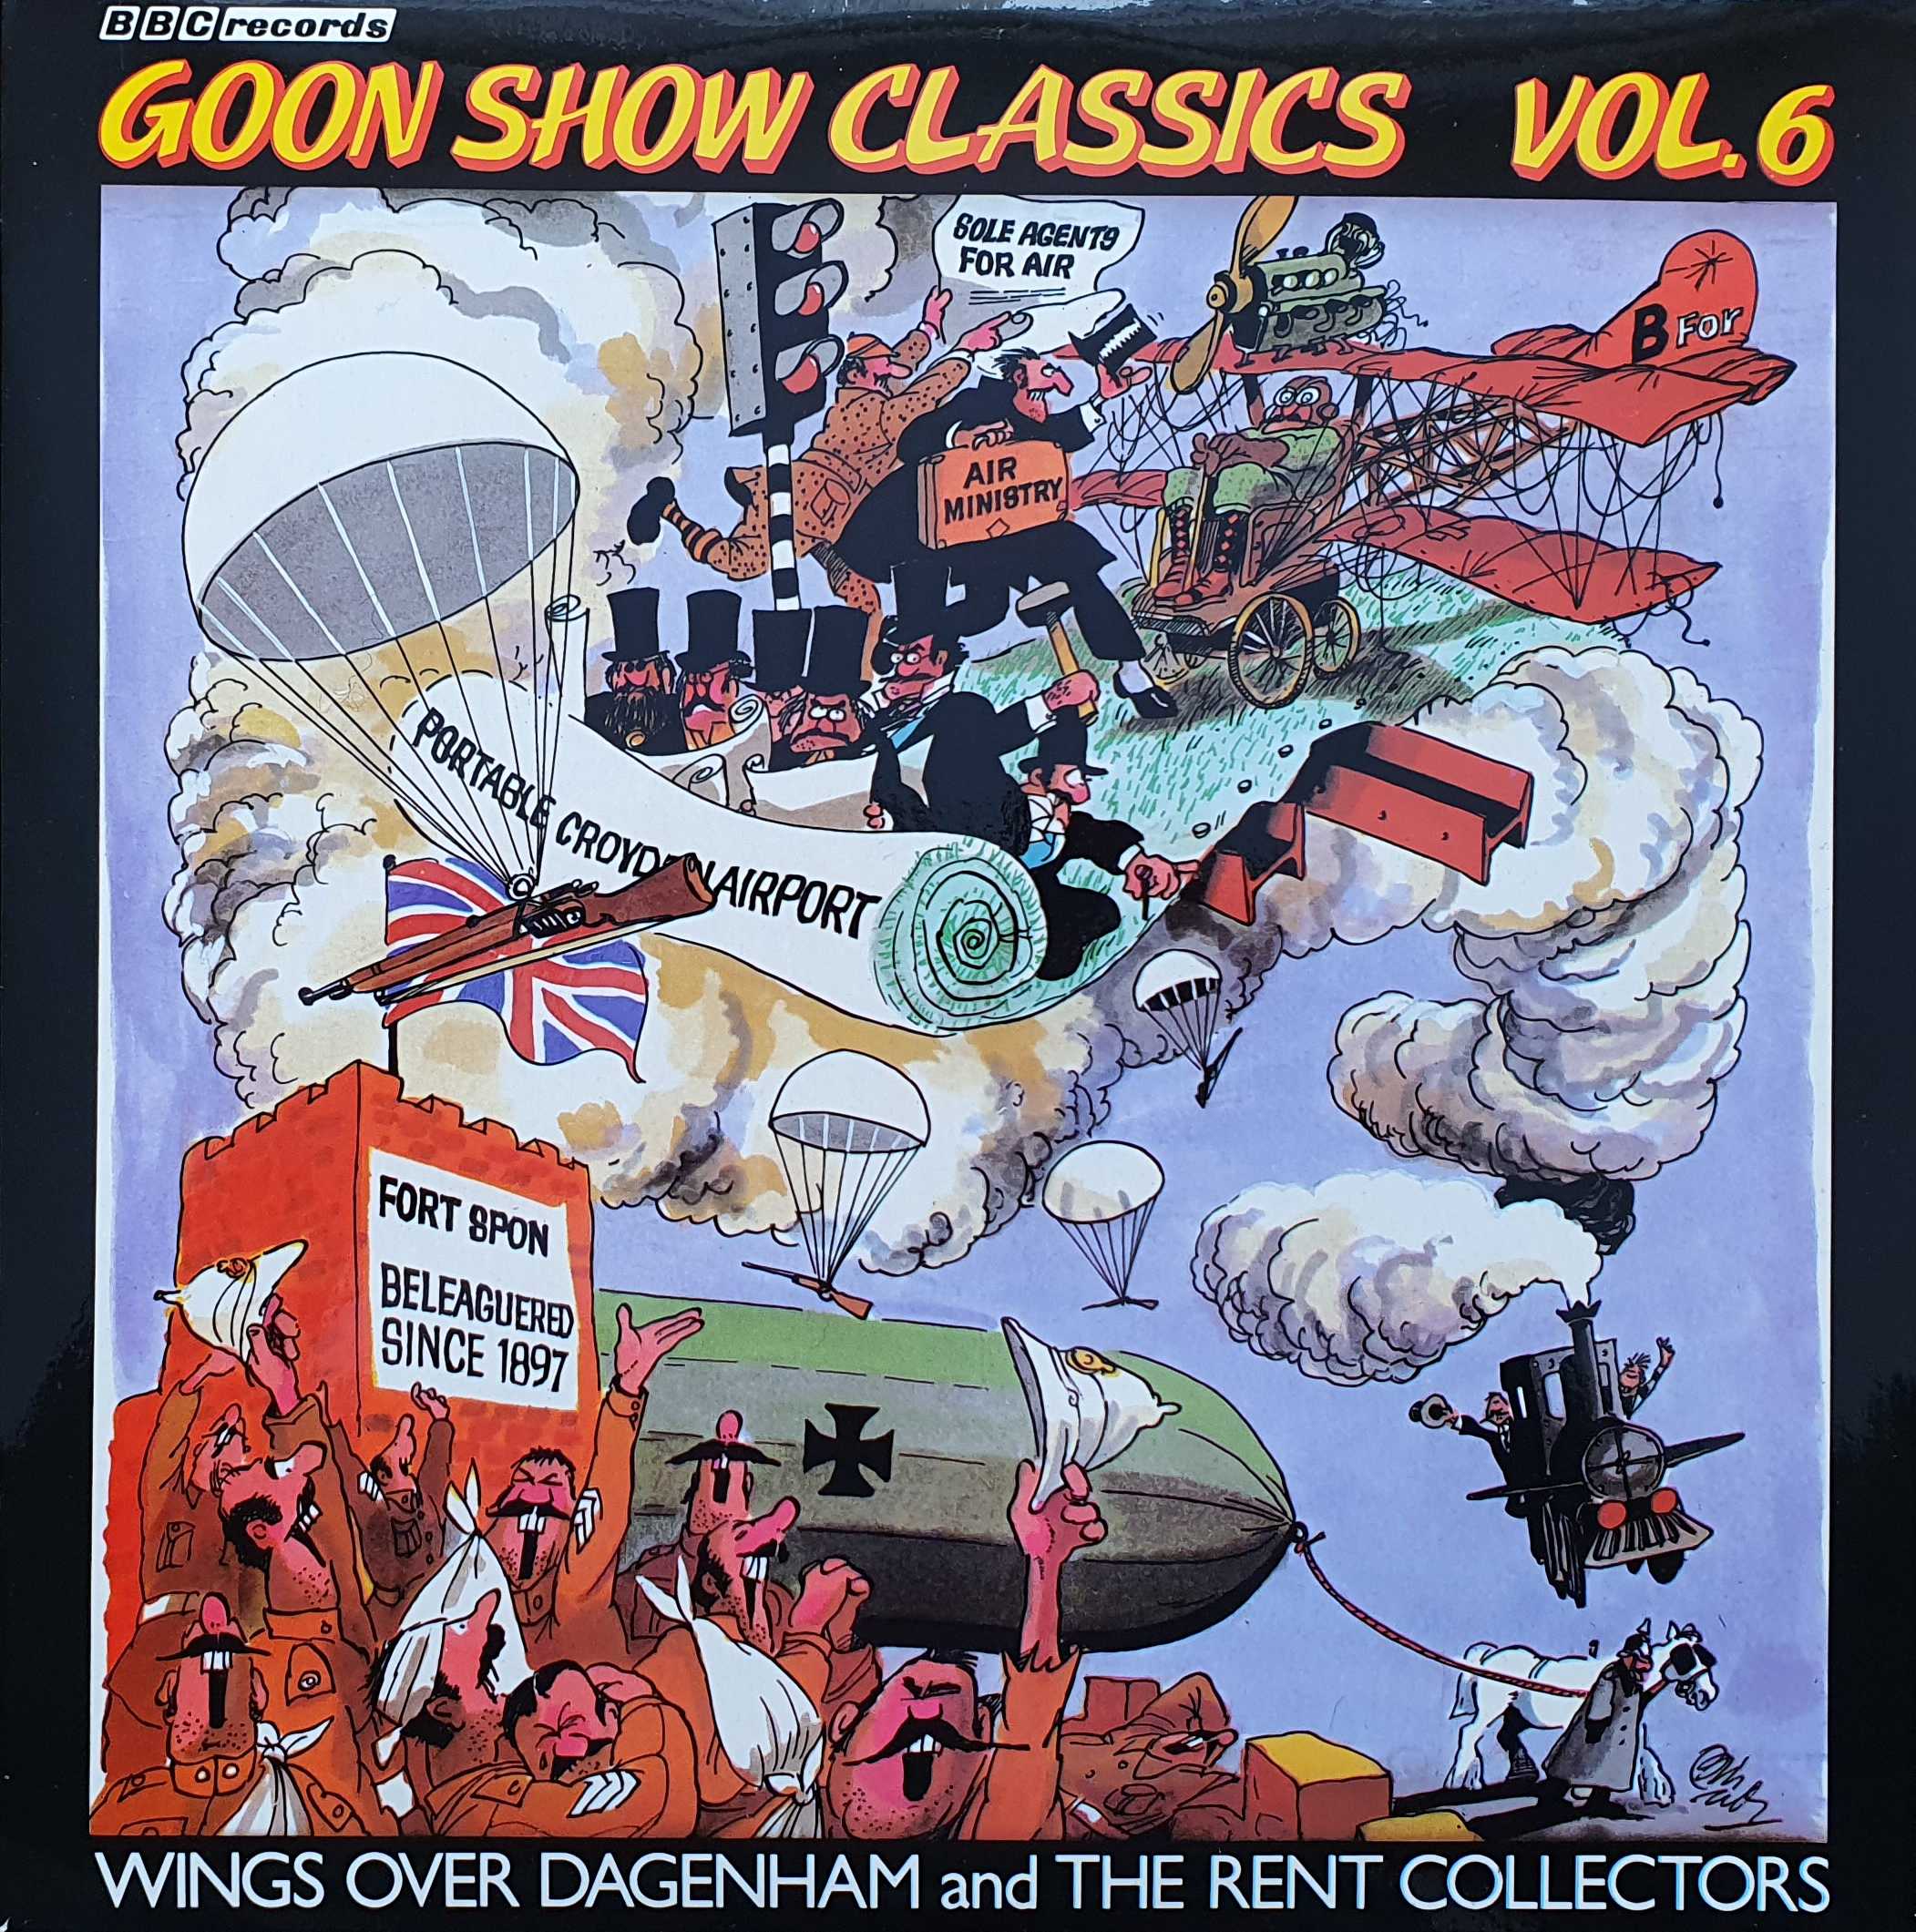 Picture of Goon Show classics vol. 6 by artist The Goon Show from the BBC albums - Records and Tapes library